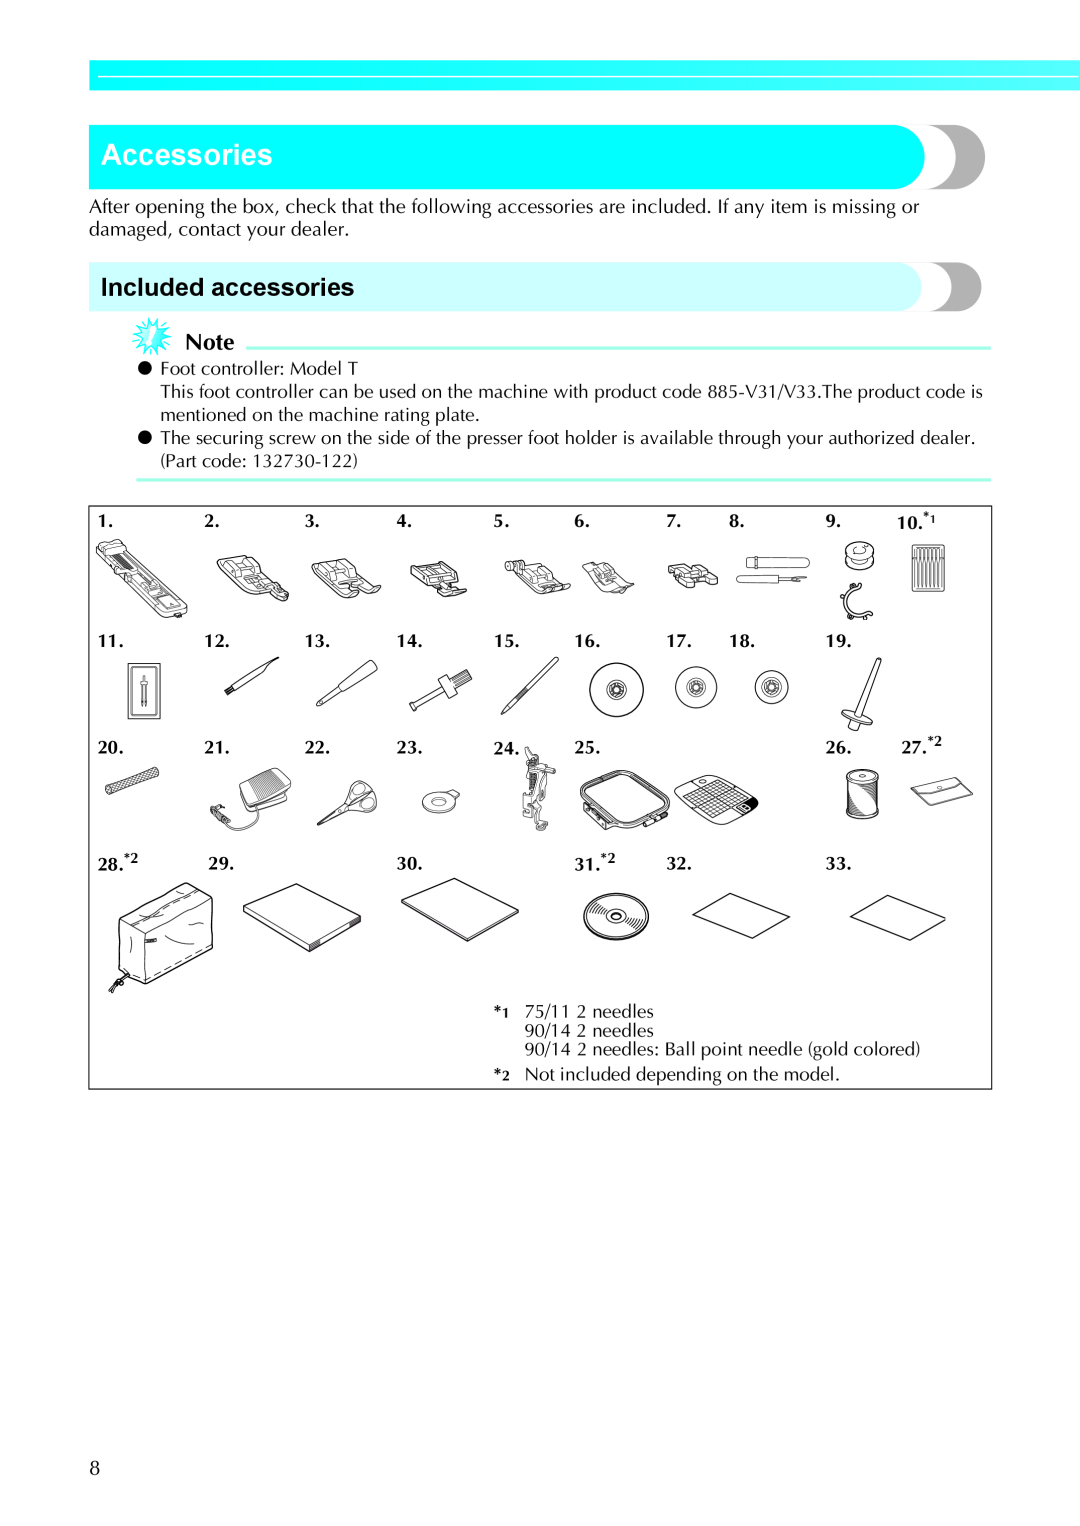 Brother 885-V33, 885-V31 operation manual Accessories, Included accessories 